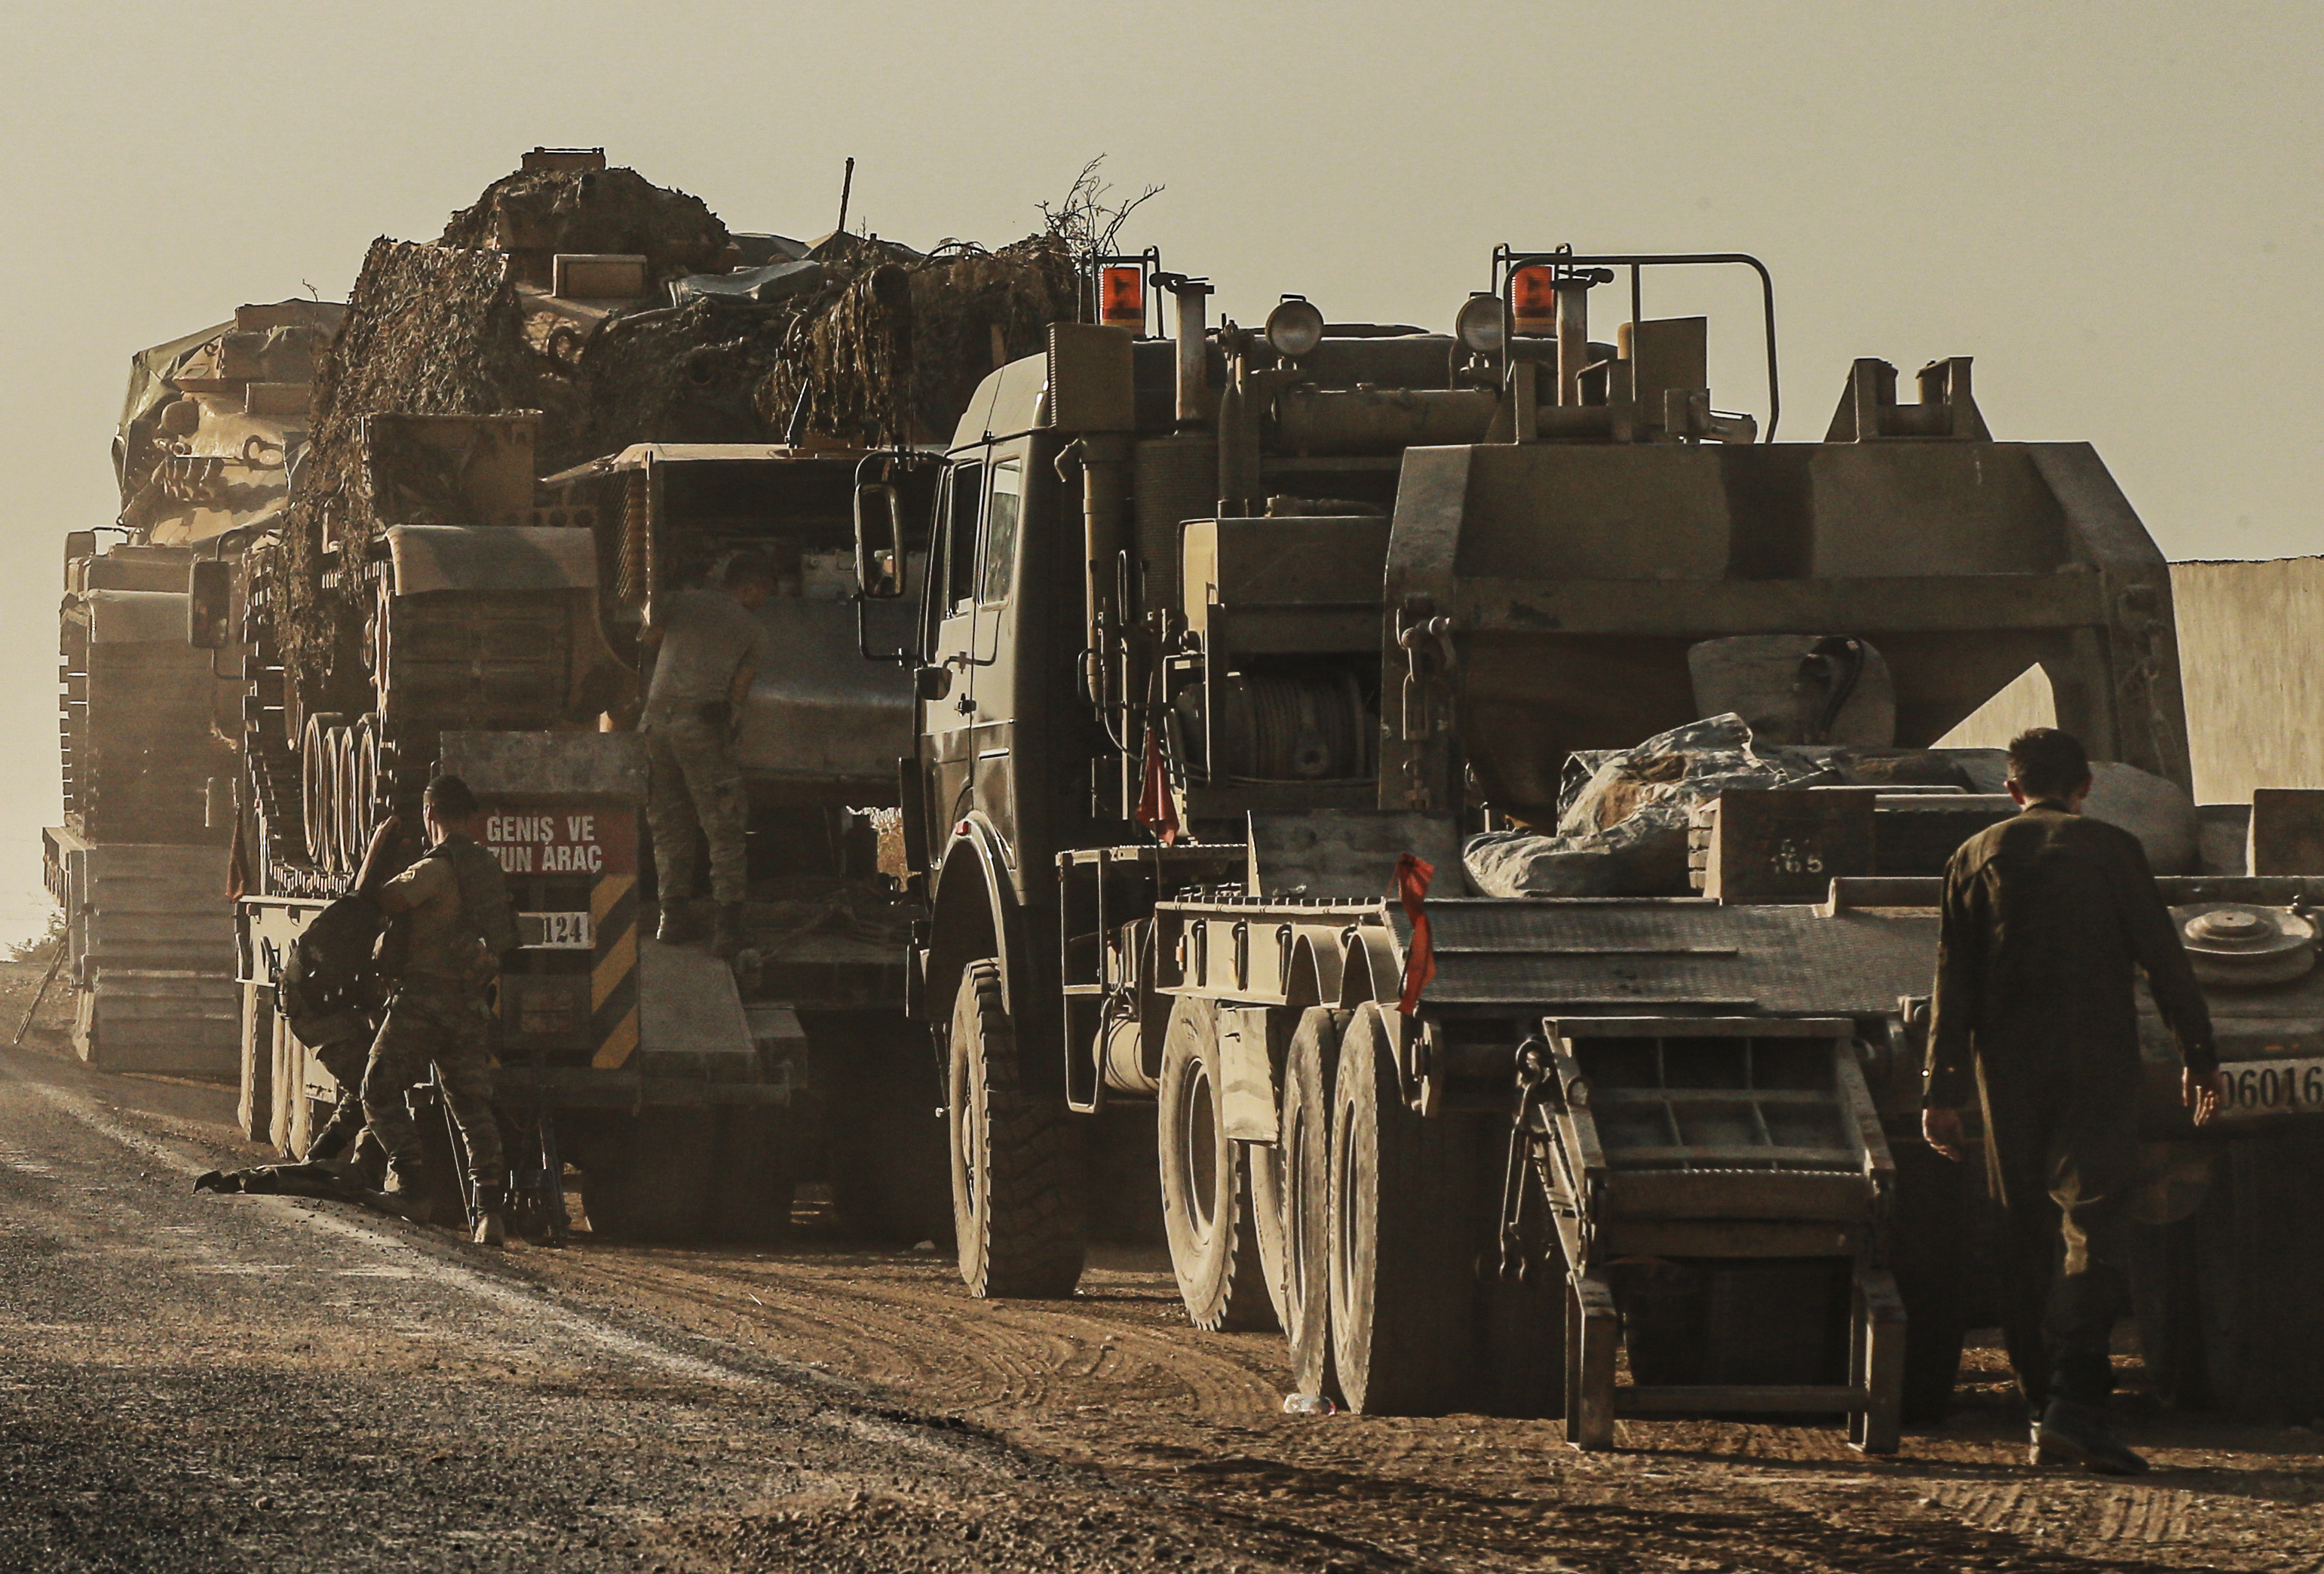 Turkish soldiers work on uploading tanks from trucks on a road towards the border of Syria in Sanliurfa province, Turkey, Monday, Oct. 14, 2019. Syrian troops entered several northern towns and villages Monday, getting close to the Turkish border as Turkey's army and opposition forces backed by Ankara marched south in the same direction, raising concerns of a clash between the two sides as Turkey's invasion of northern Syria entered its sixth day. (AP Photo/Emrah Gurel)